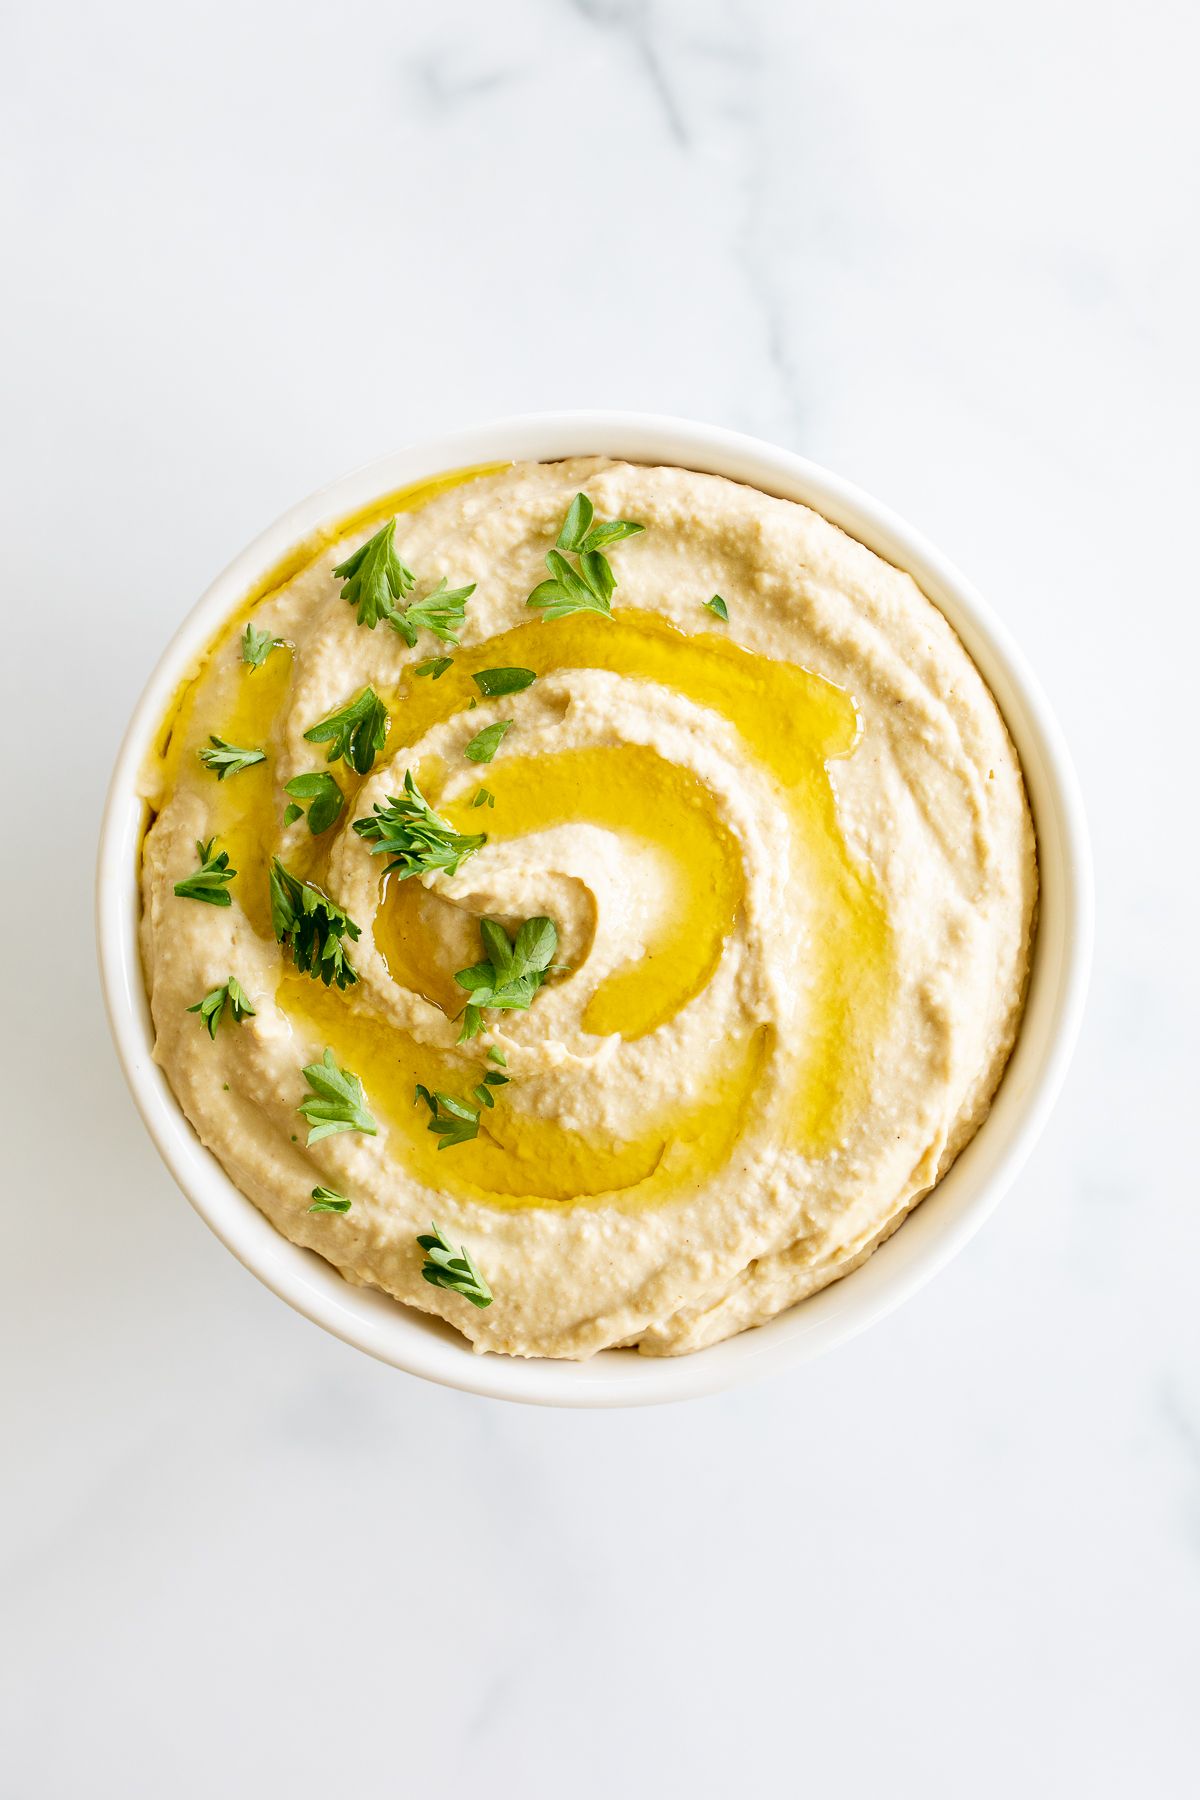 A small bowl of an easy hummus recipe on a white countertop.